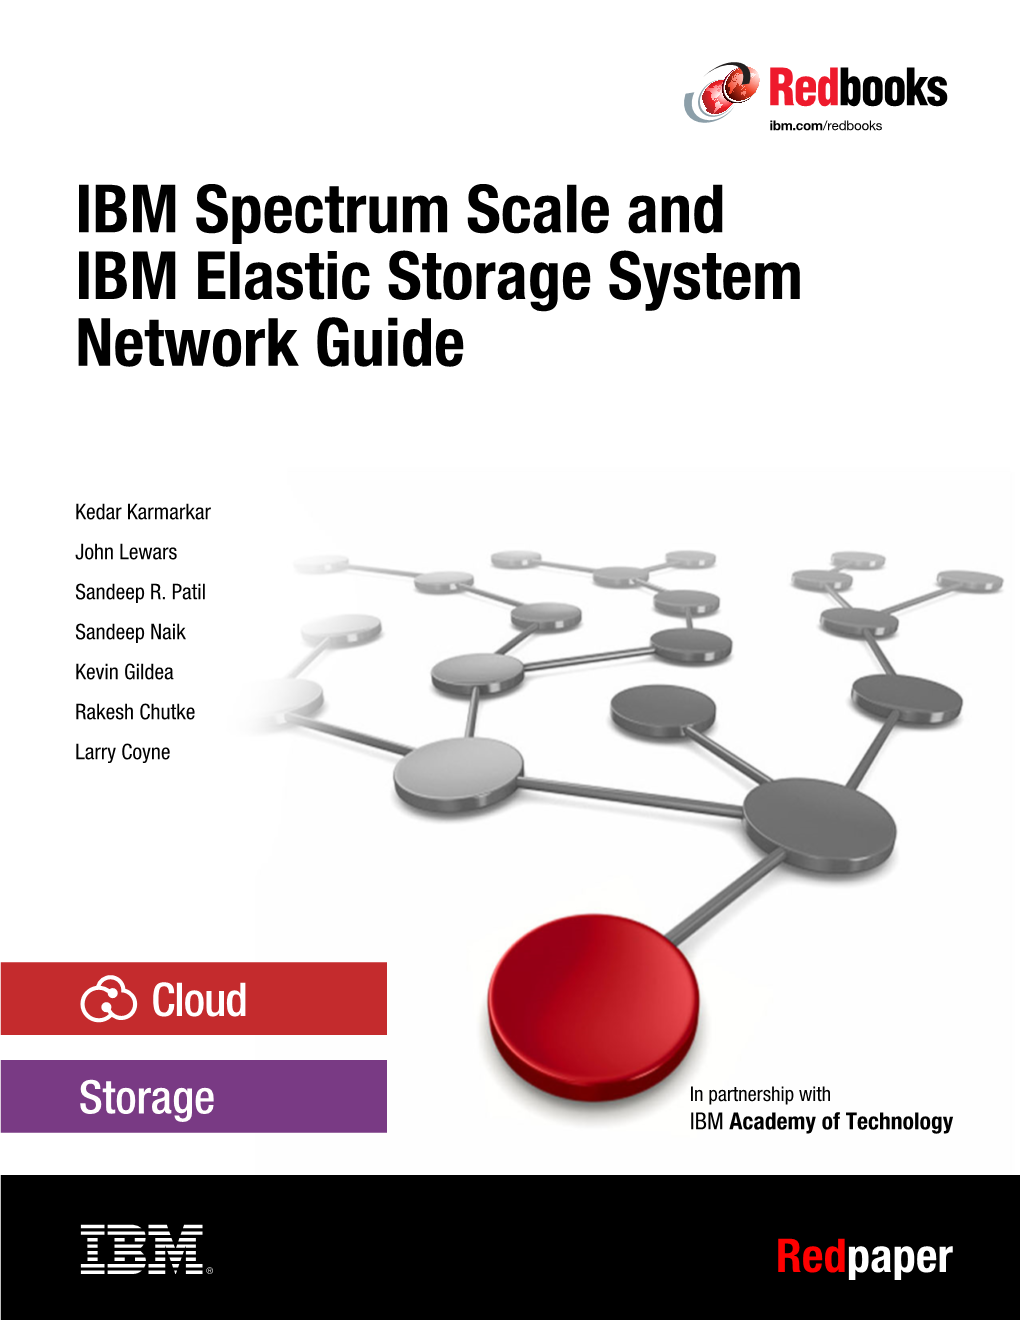 IBM Spectrum Scale and IBM Elastic Storage System Network Guide